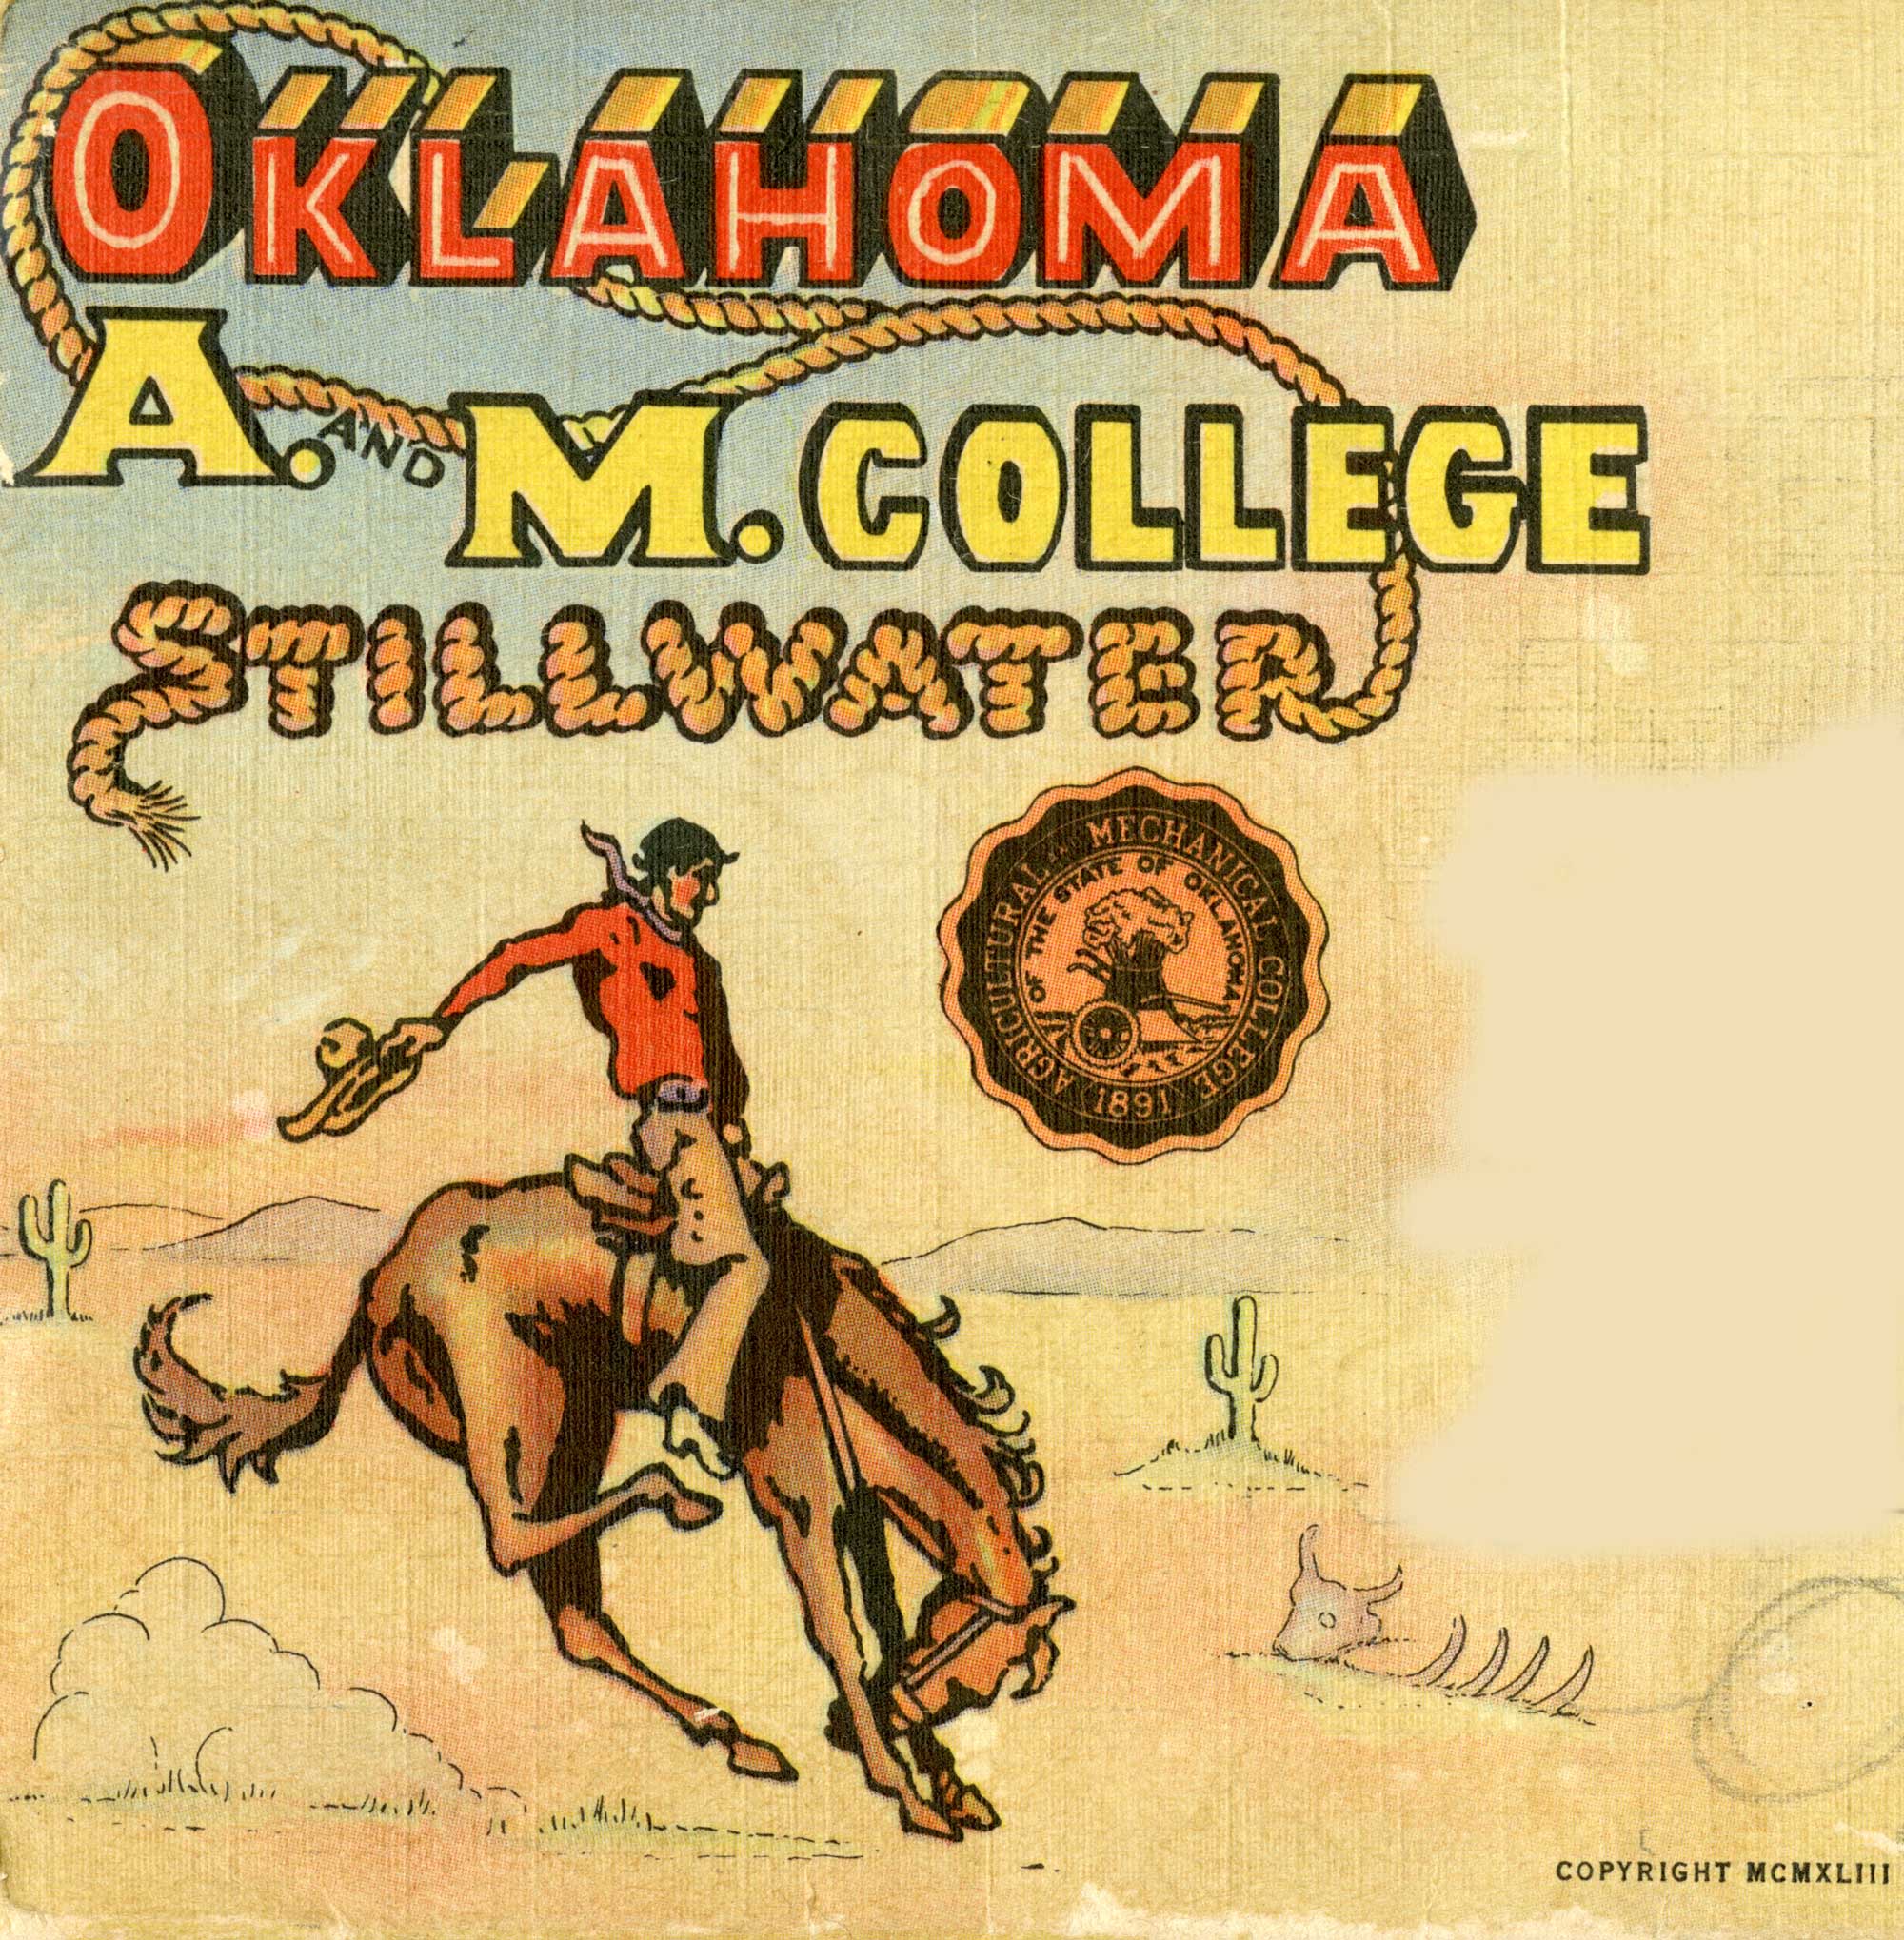 Illustrations of cowboys on bucking horses were featured in OAMC publications, correspondence and postcards beginning in the late 1920s and into the early 1960s.